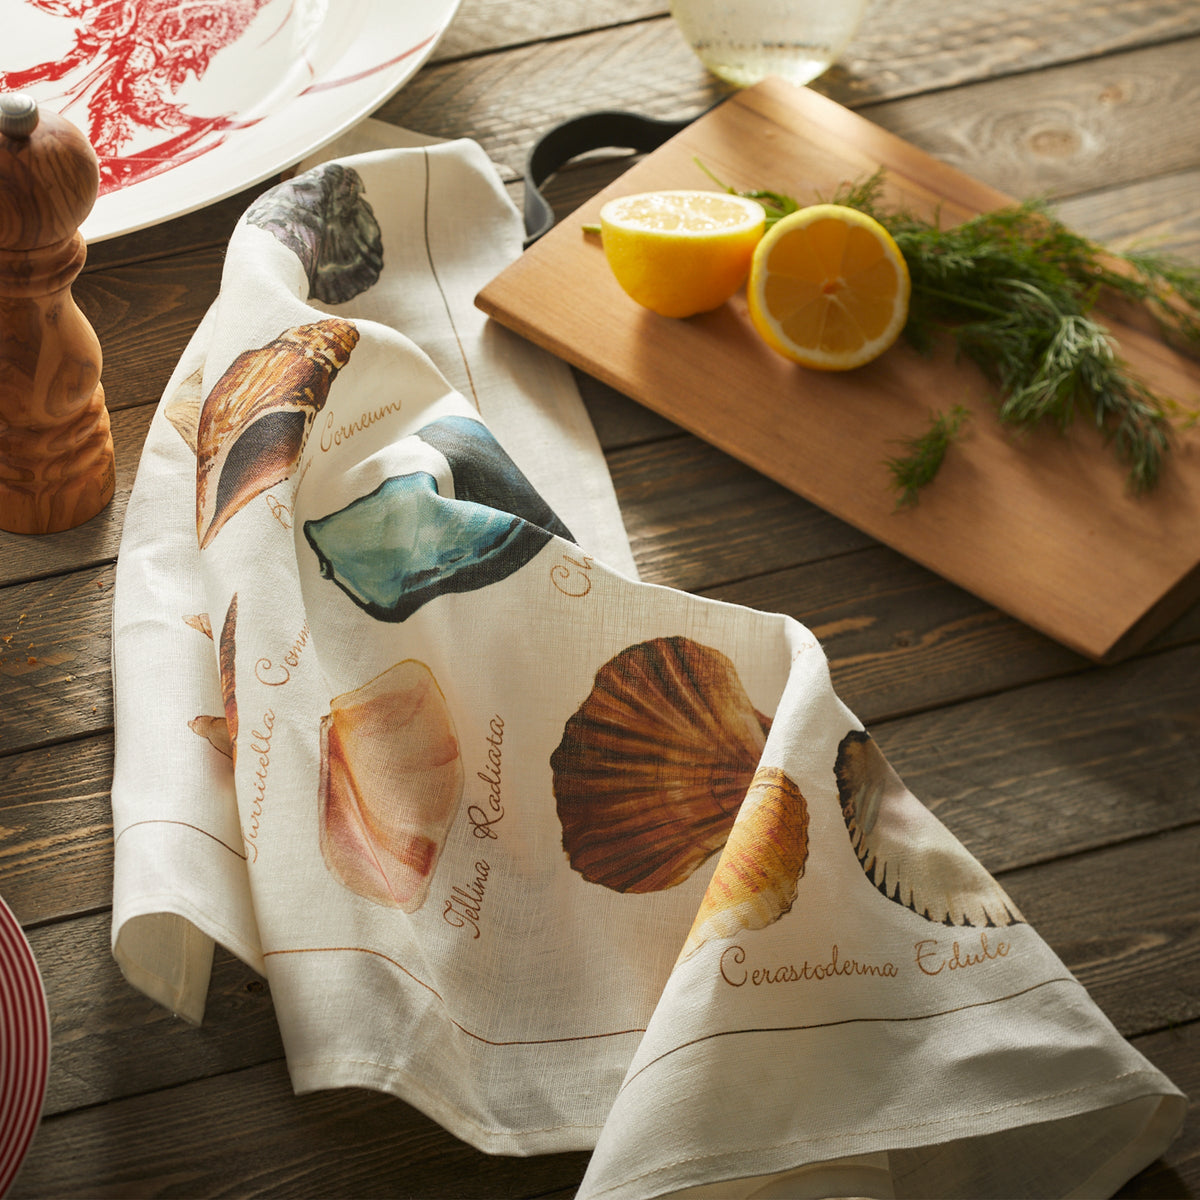 A Shoreline Linen Kitchen Towel adorned with seashells next to a cutting board with lemon and dill from Caskata.